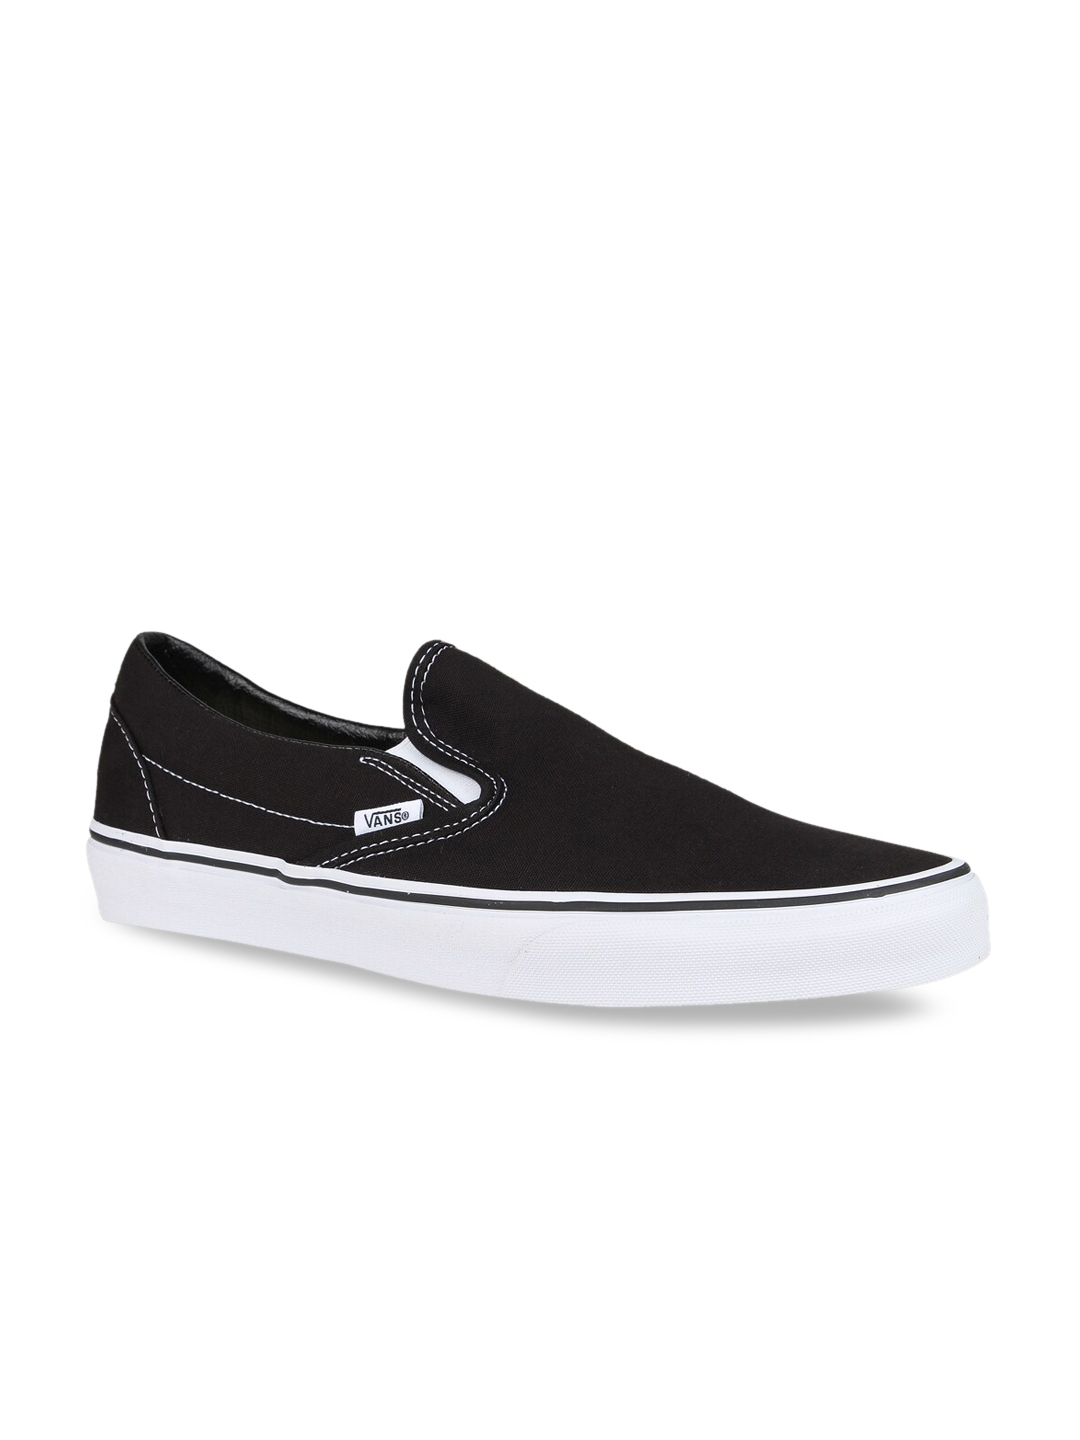 Buy Vans Unisex Black CLASSIC Slip On Sneakers - Casual Shoes for ...